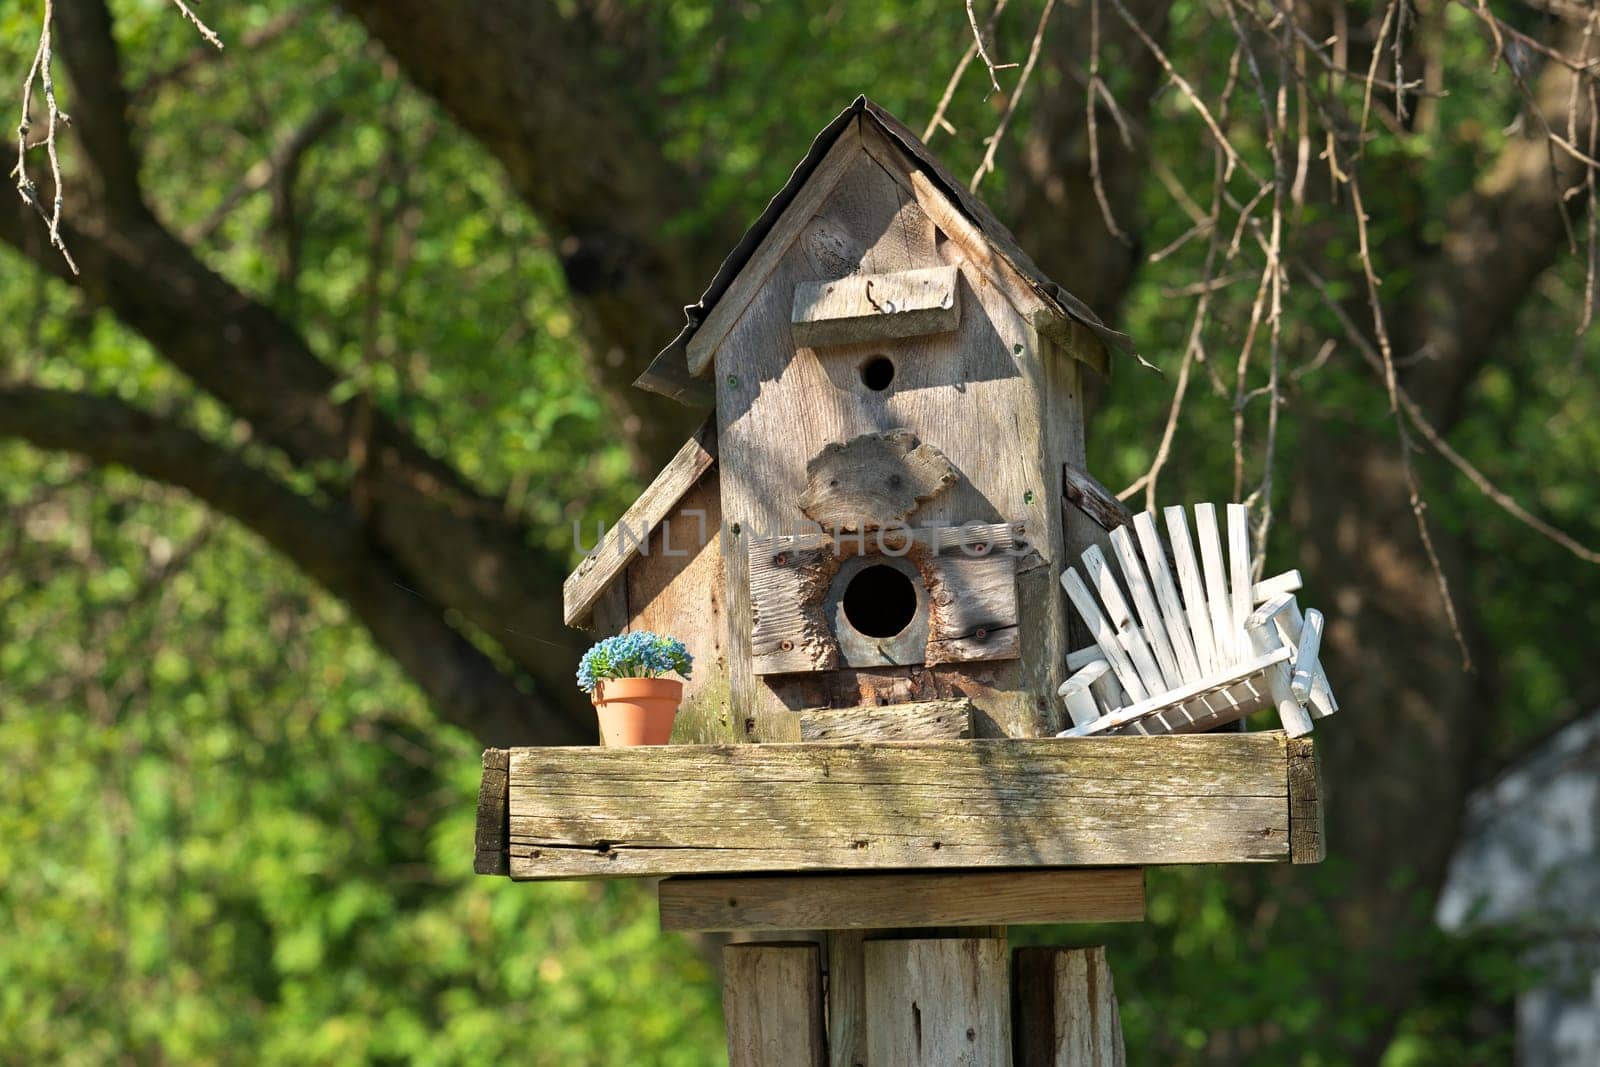 Whimsical Handmade Birdhouse in Garden with Miniature Chair and Potted Plant by markvandam